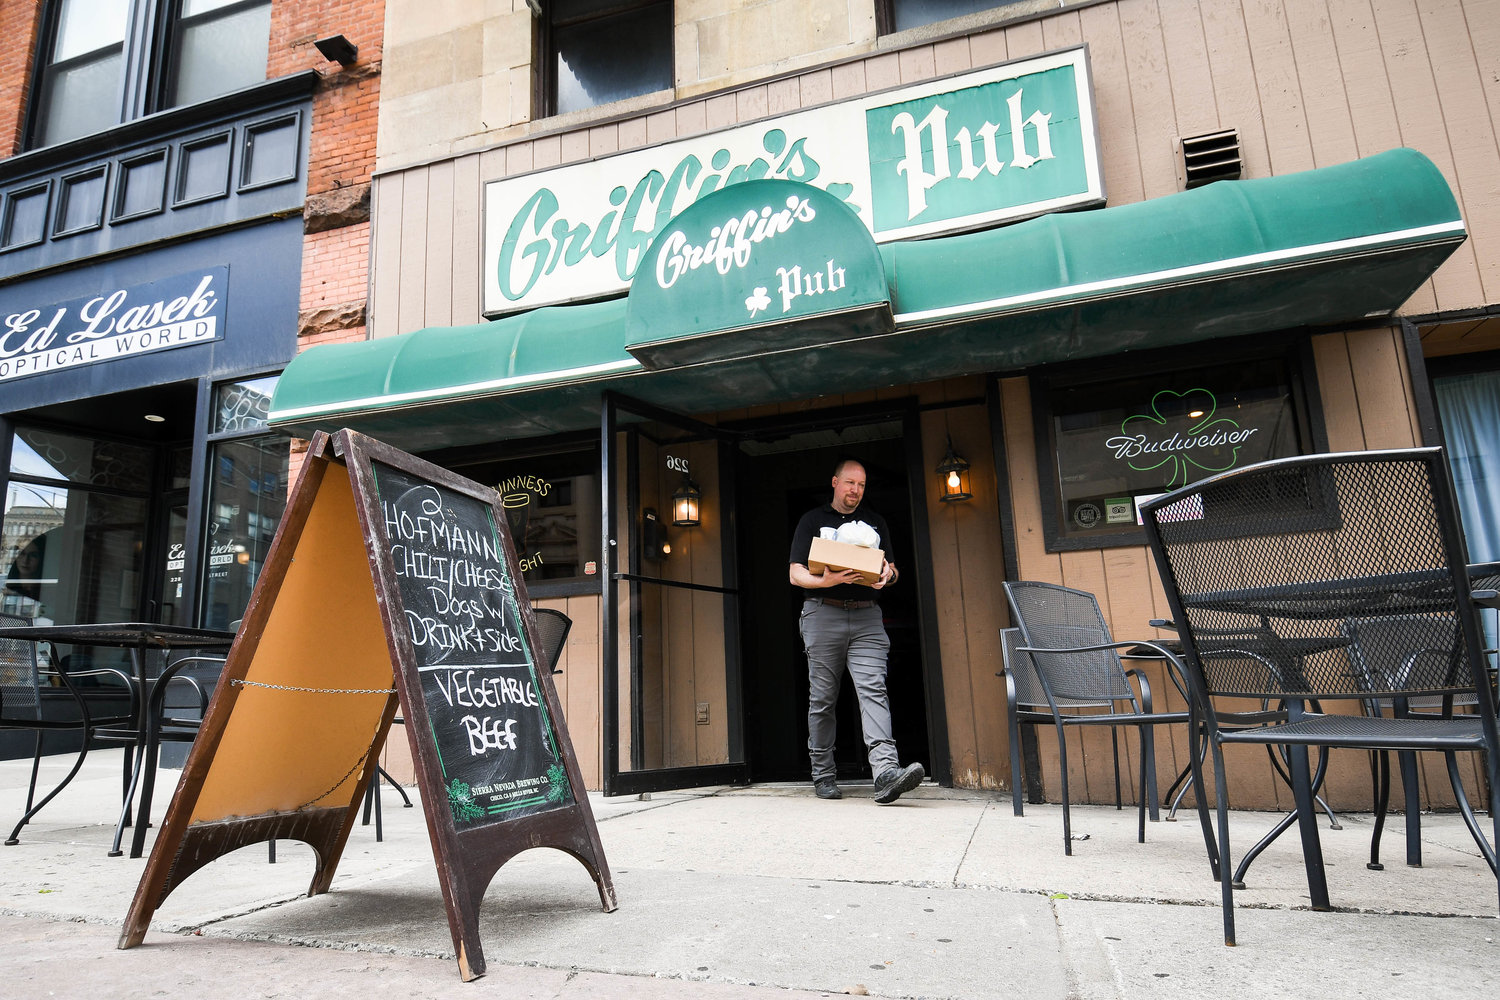 A customer leaves with a to-go order outside of Griffin's Pub in Utica.